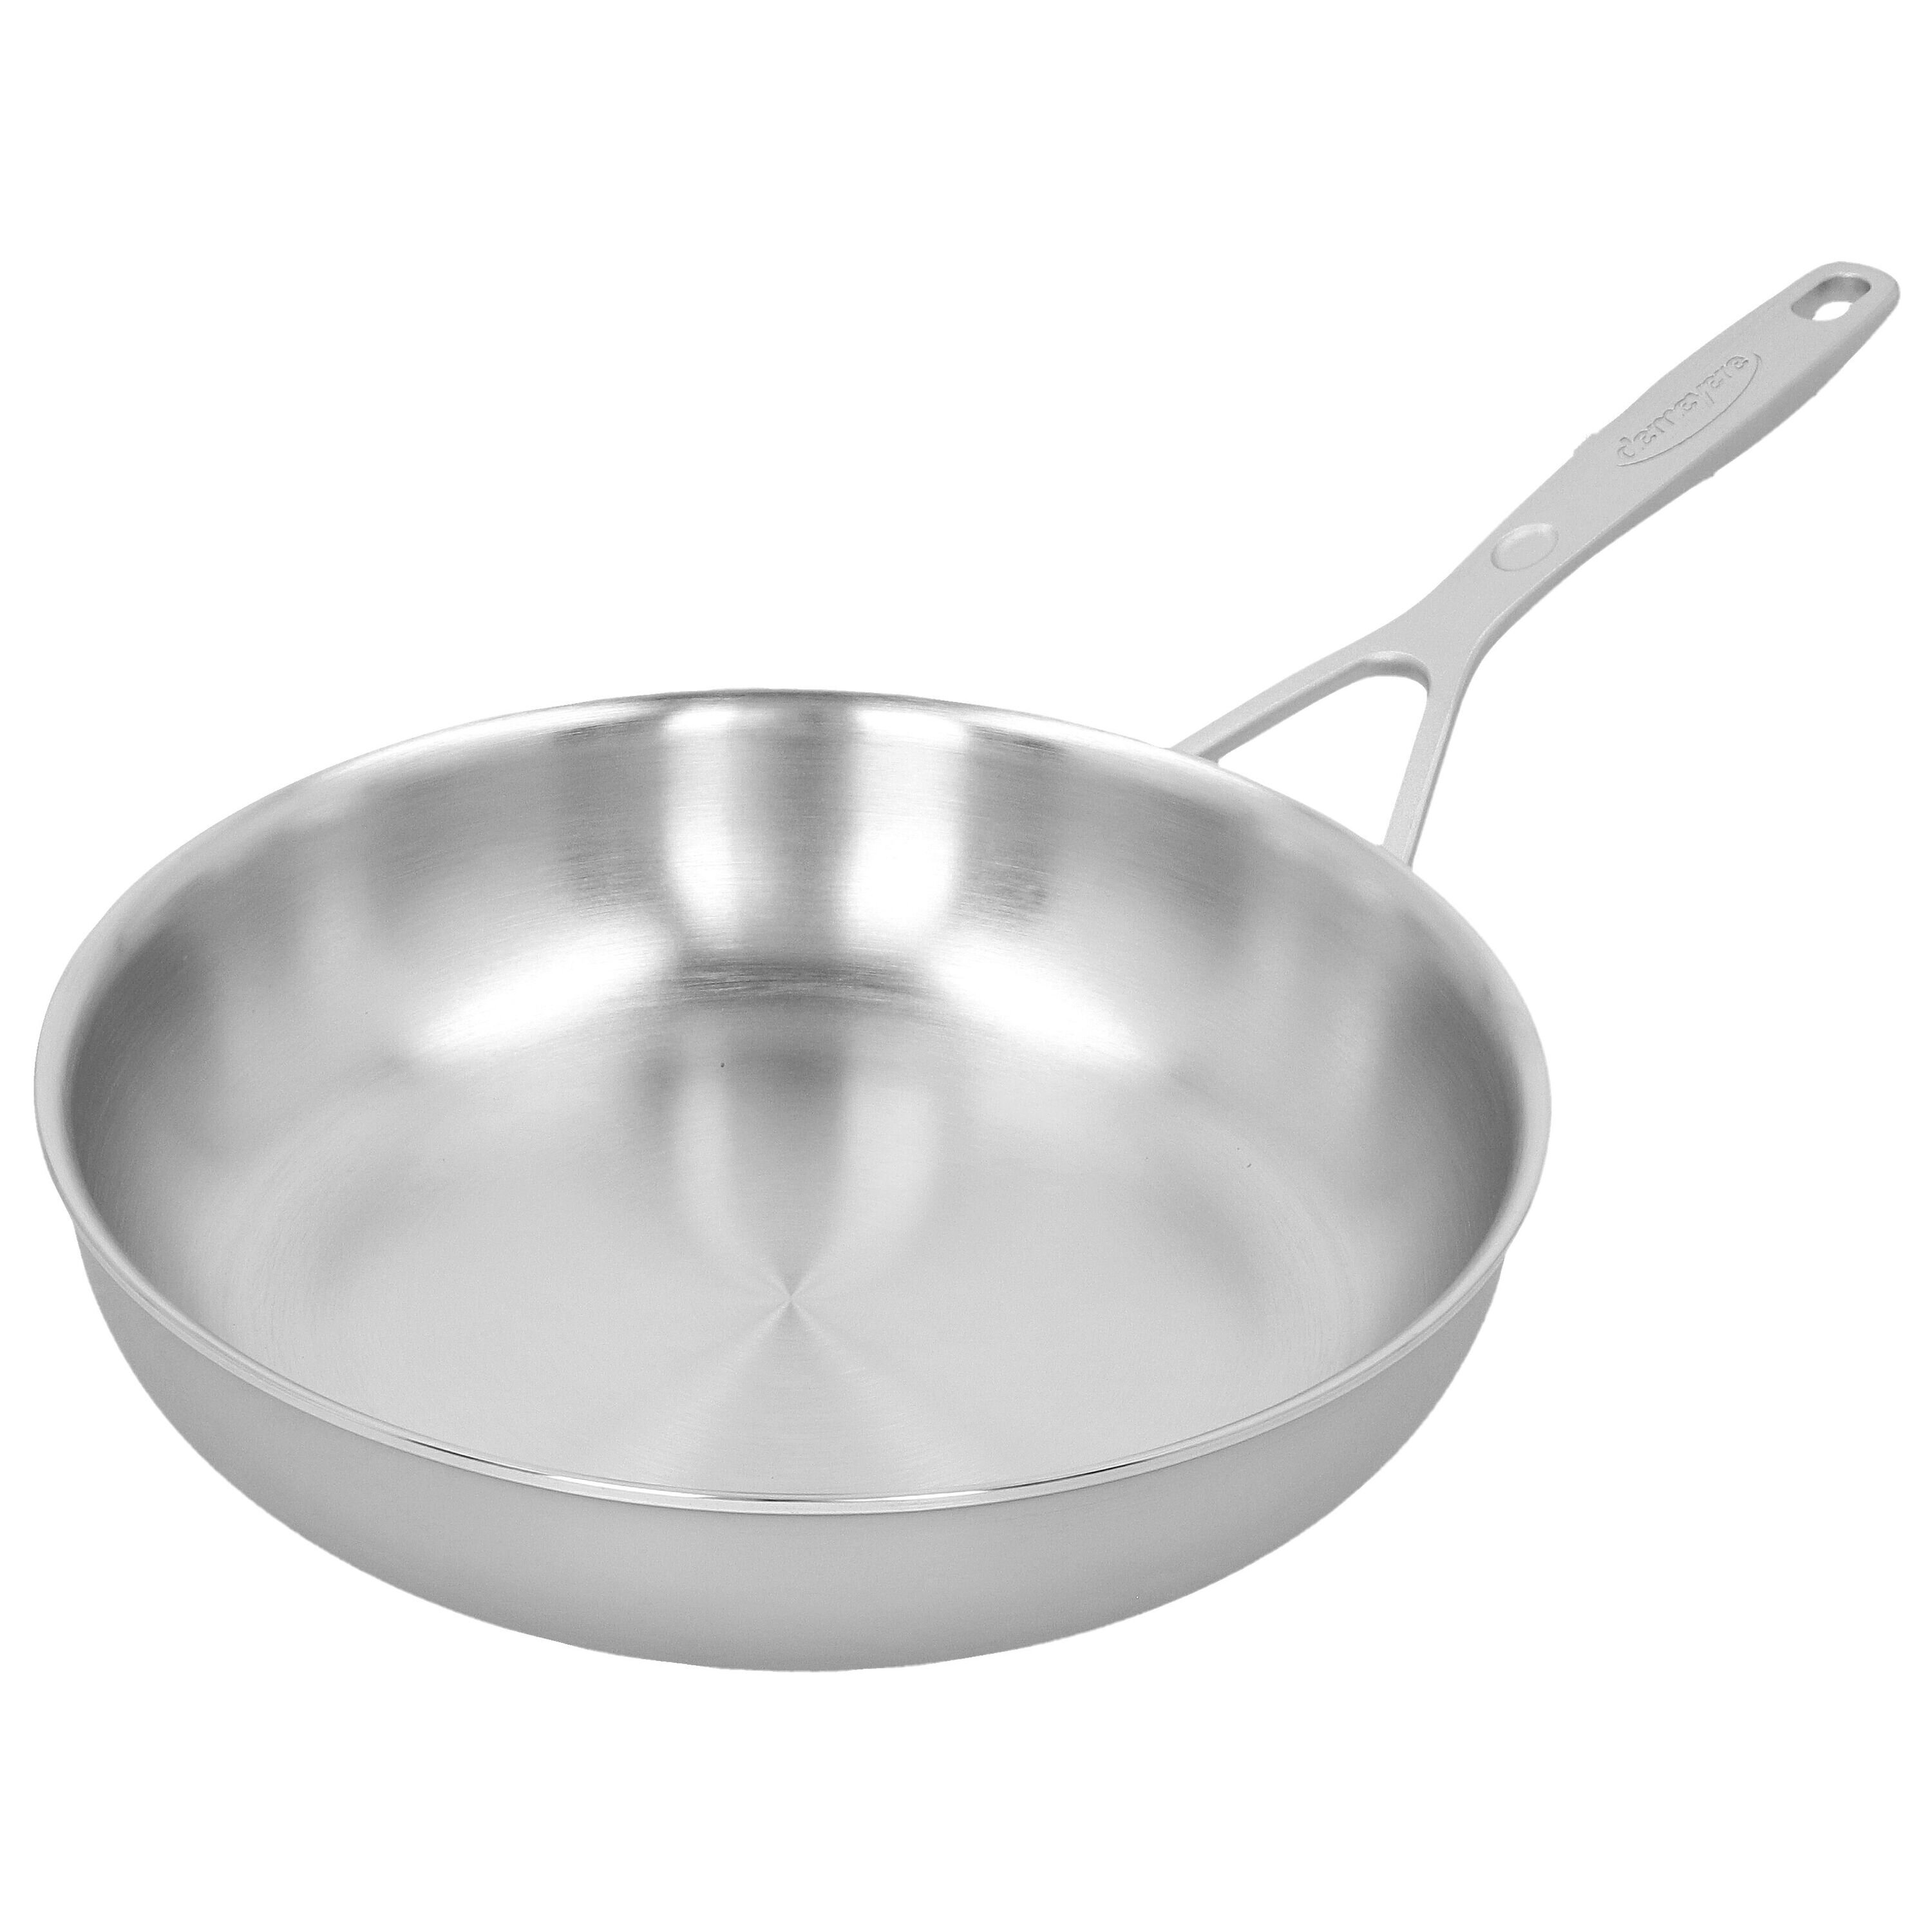 Demeyere 5-Ply Stainless Steel Pan & Perigold